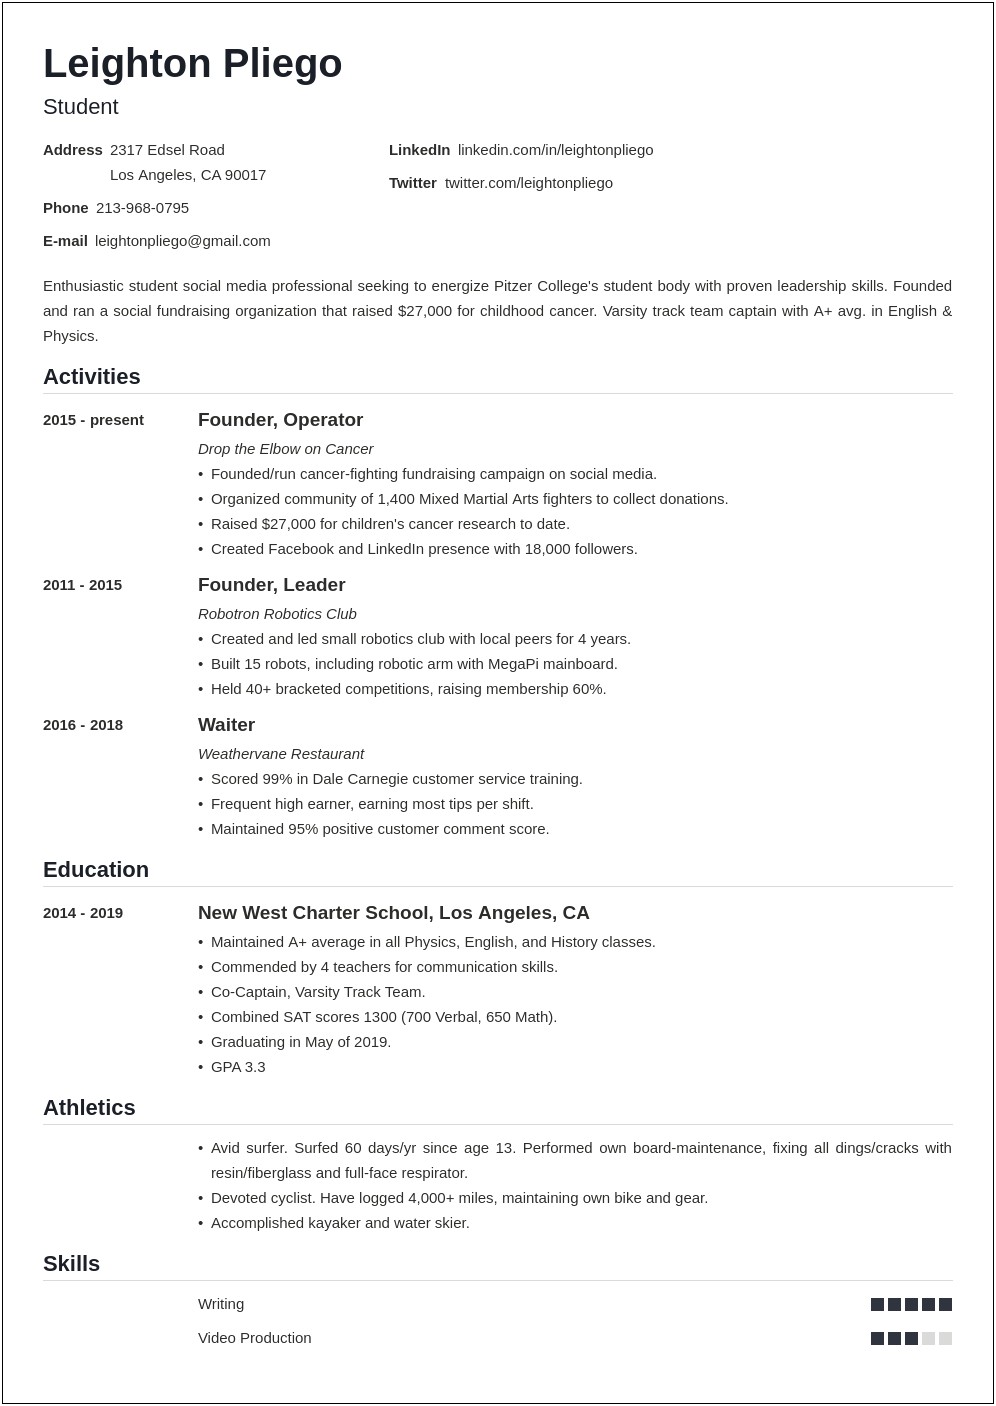 Sample High School Athletic Resume For College